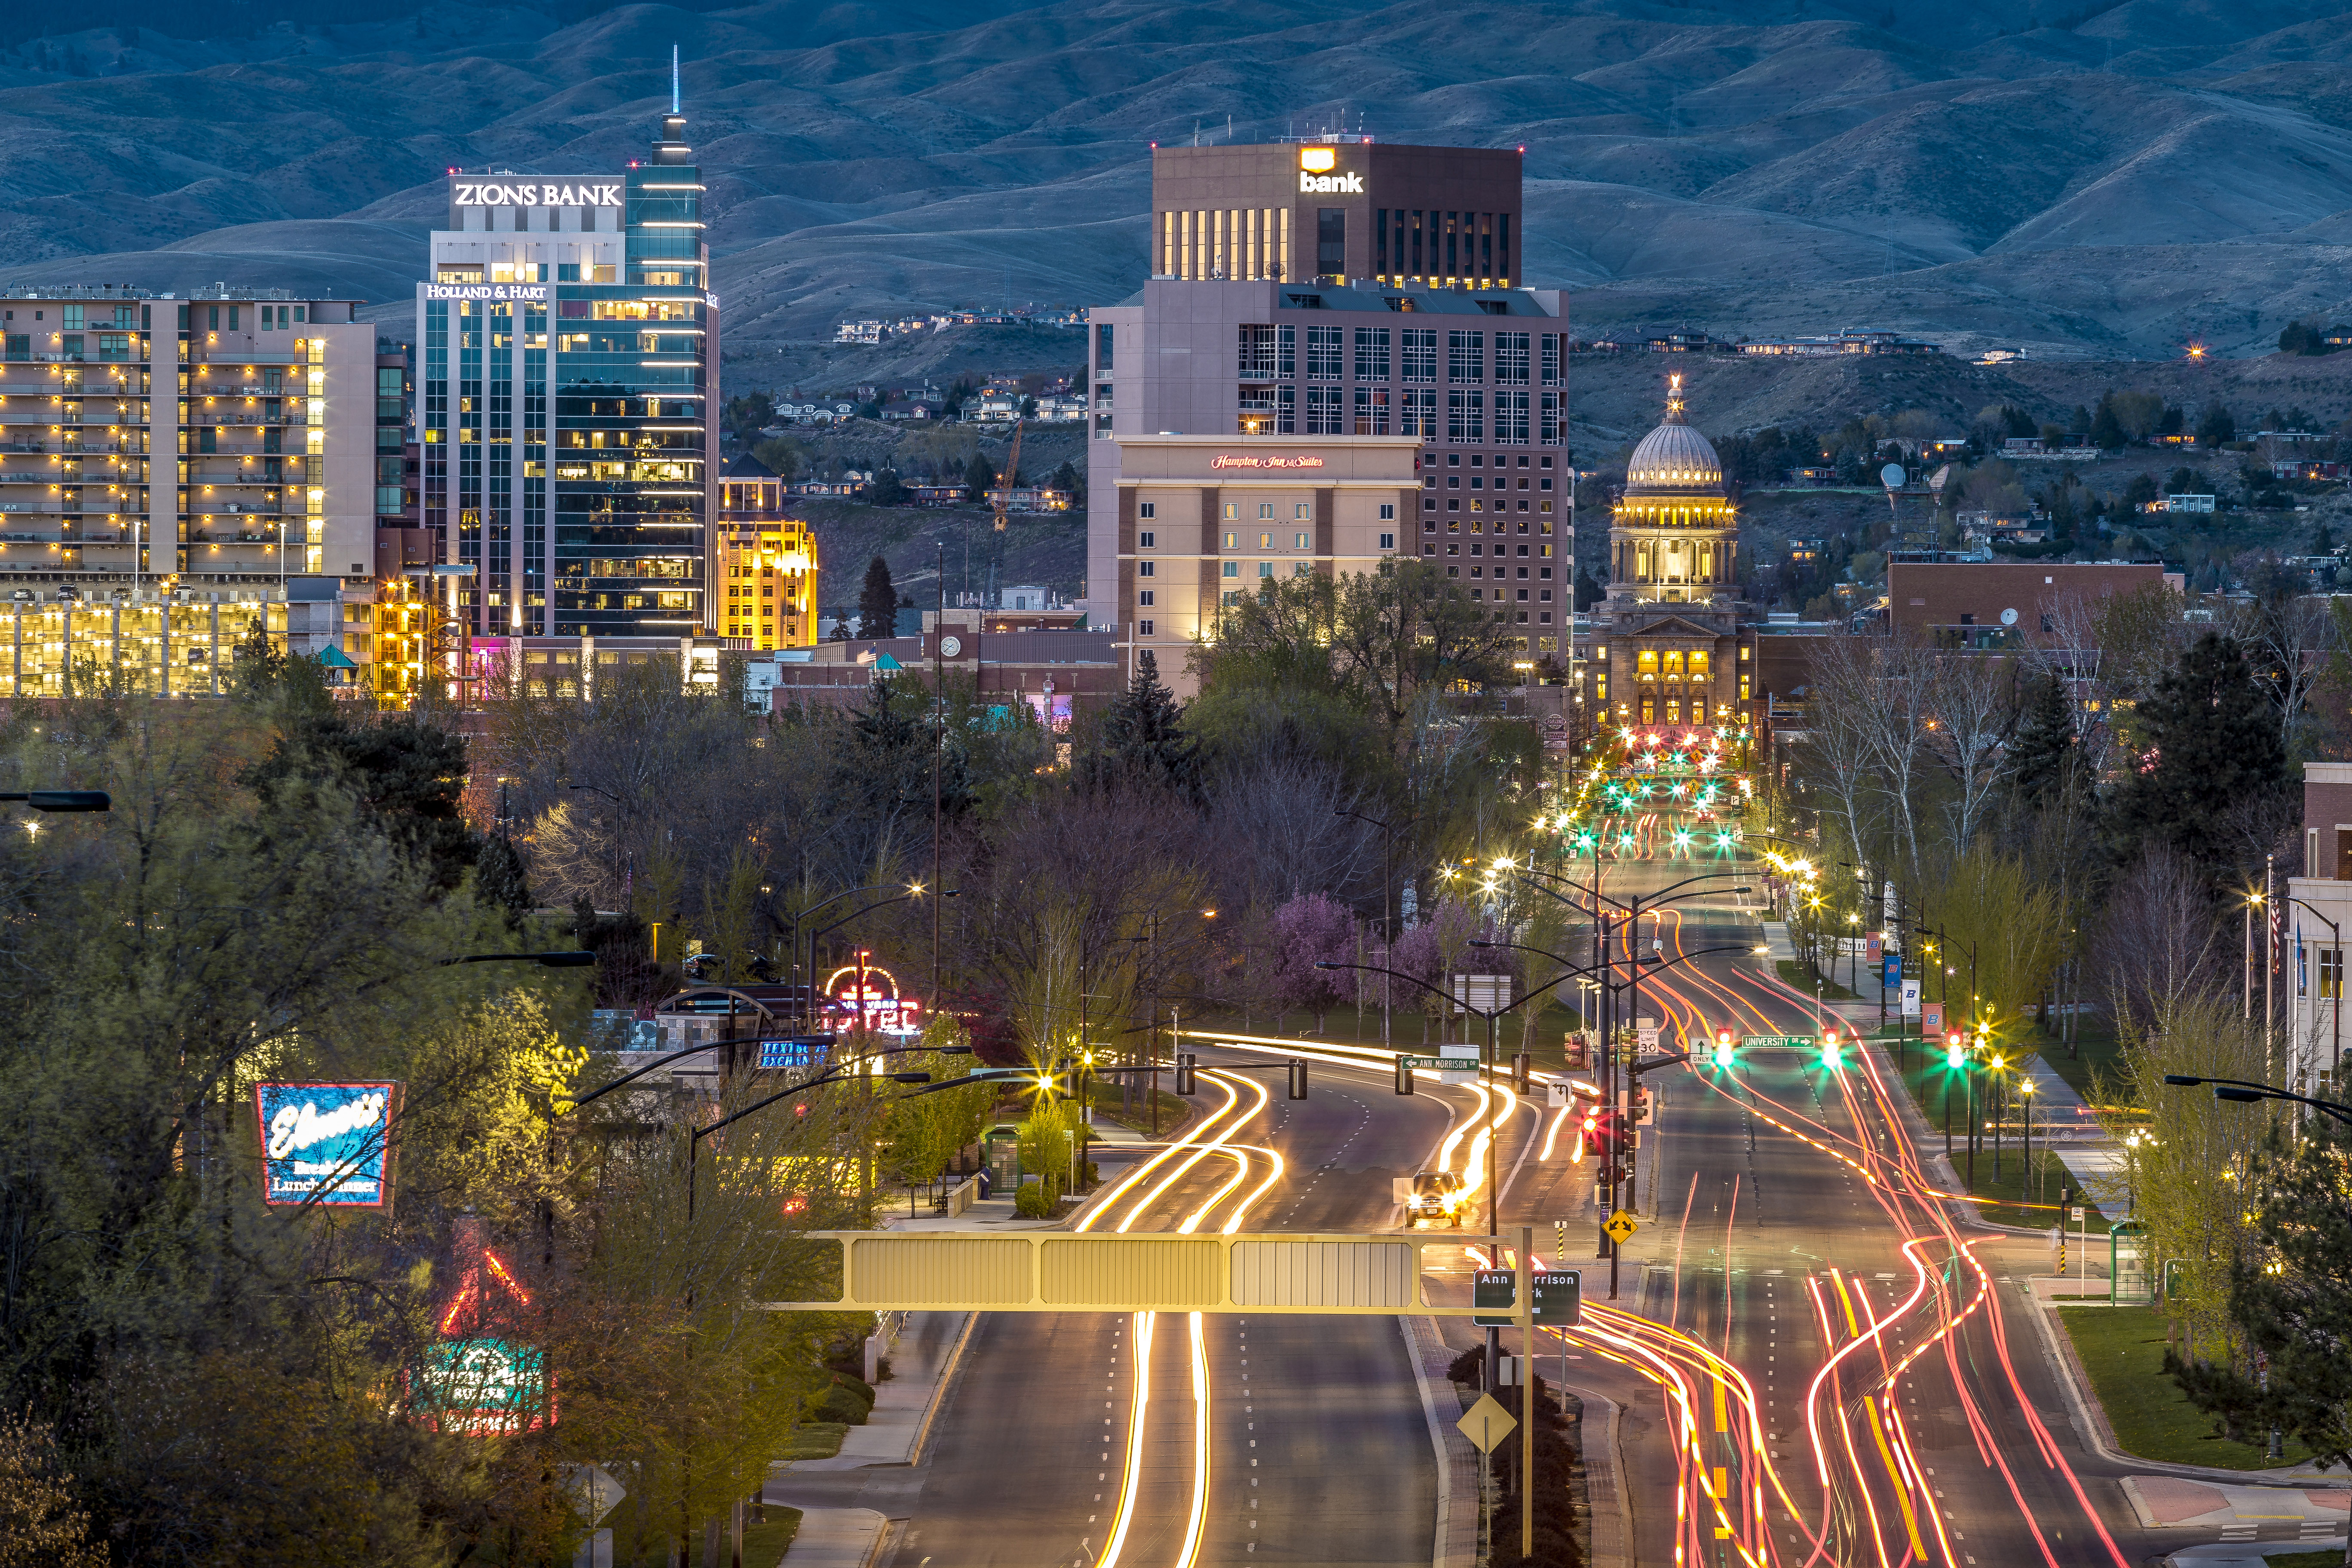 Cityscape of Boise Lighted Up at Night in Boise, Idaho image - Free ...